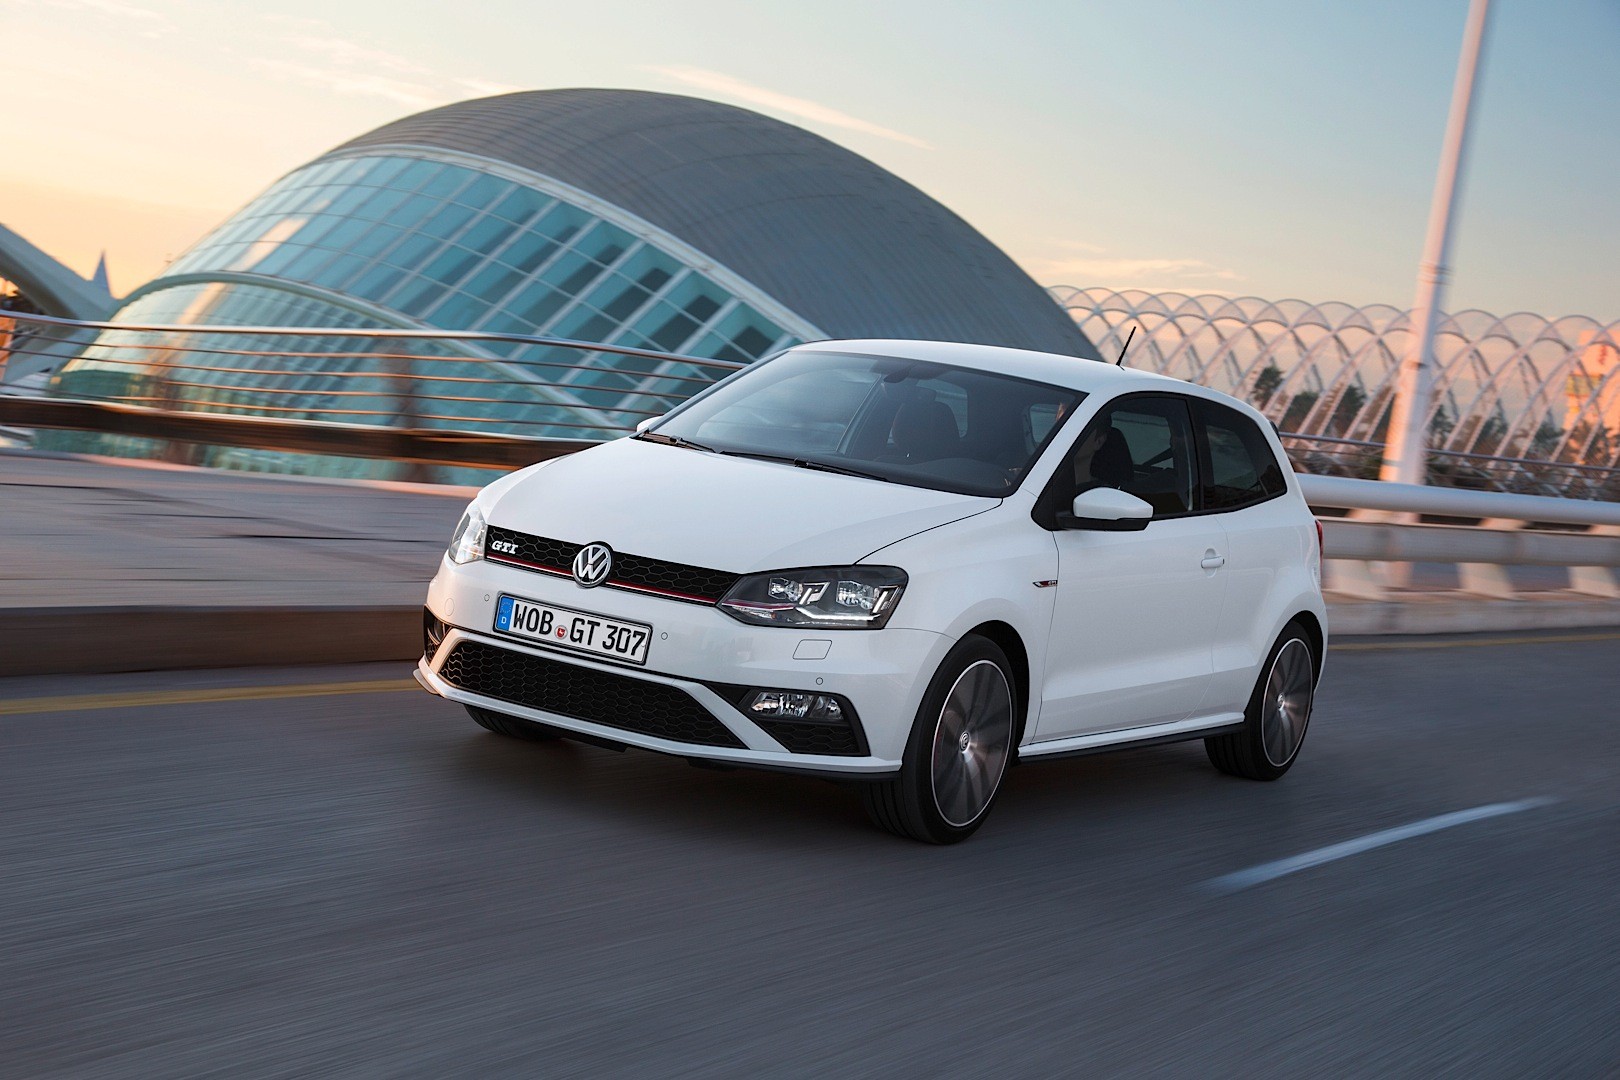 New Volkswagen Polo GTI (2014-2017) Review